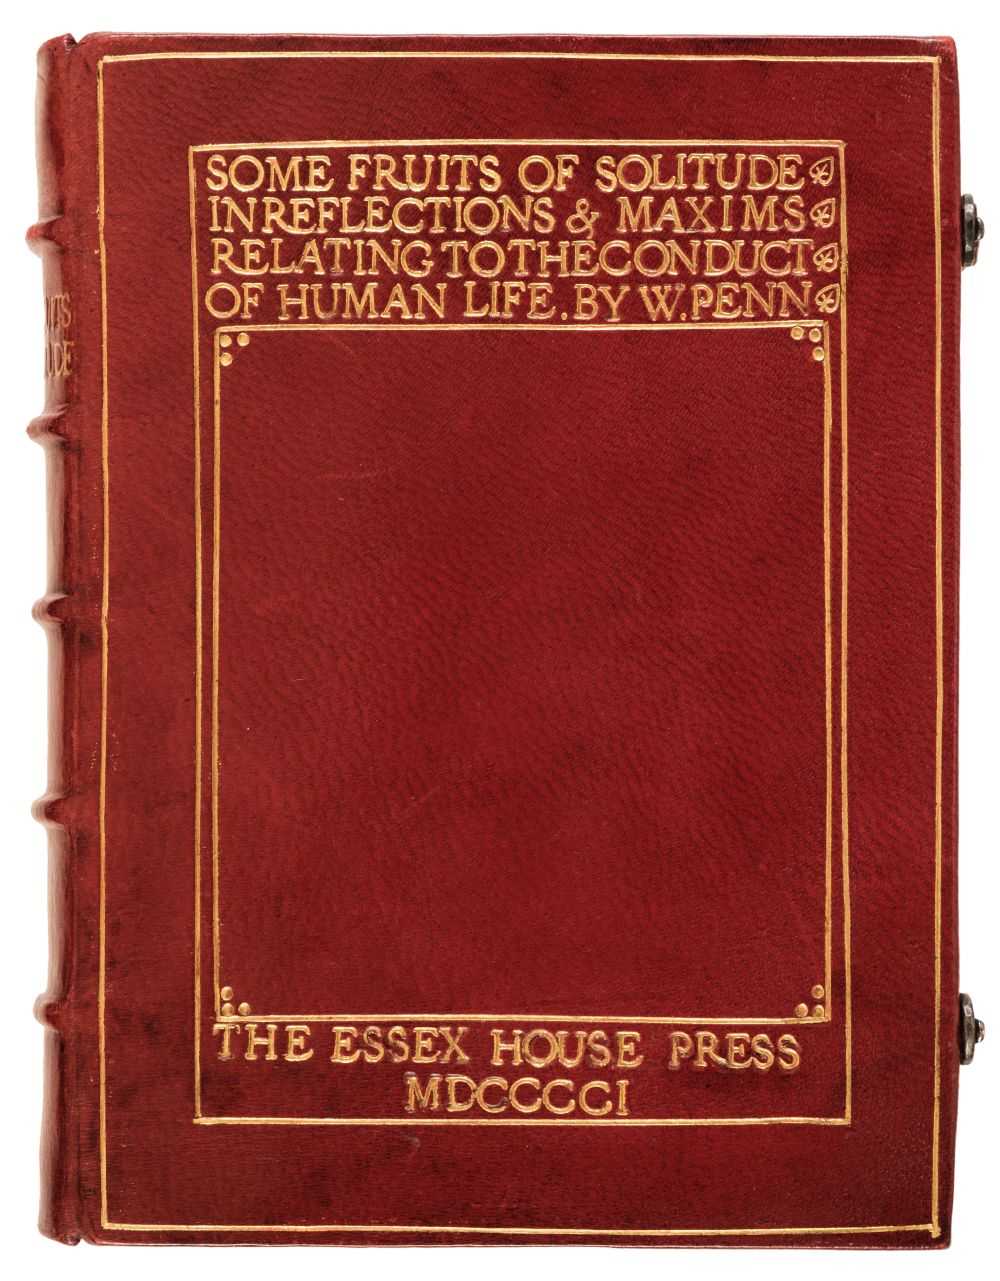 Lot 605 - Essex House Press. Some Fruits of Solitude in Reflections and Maxims, 1901